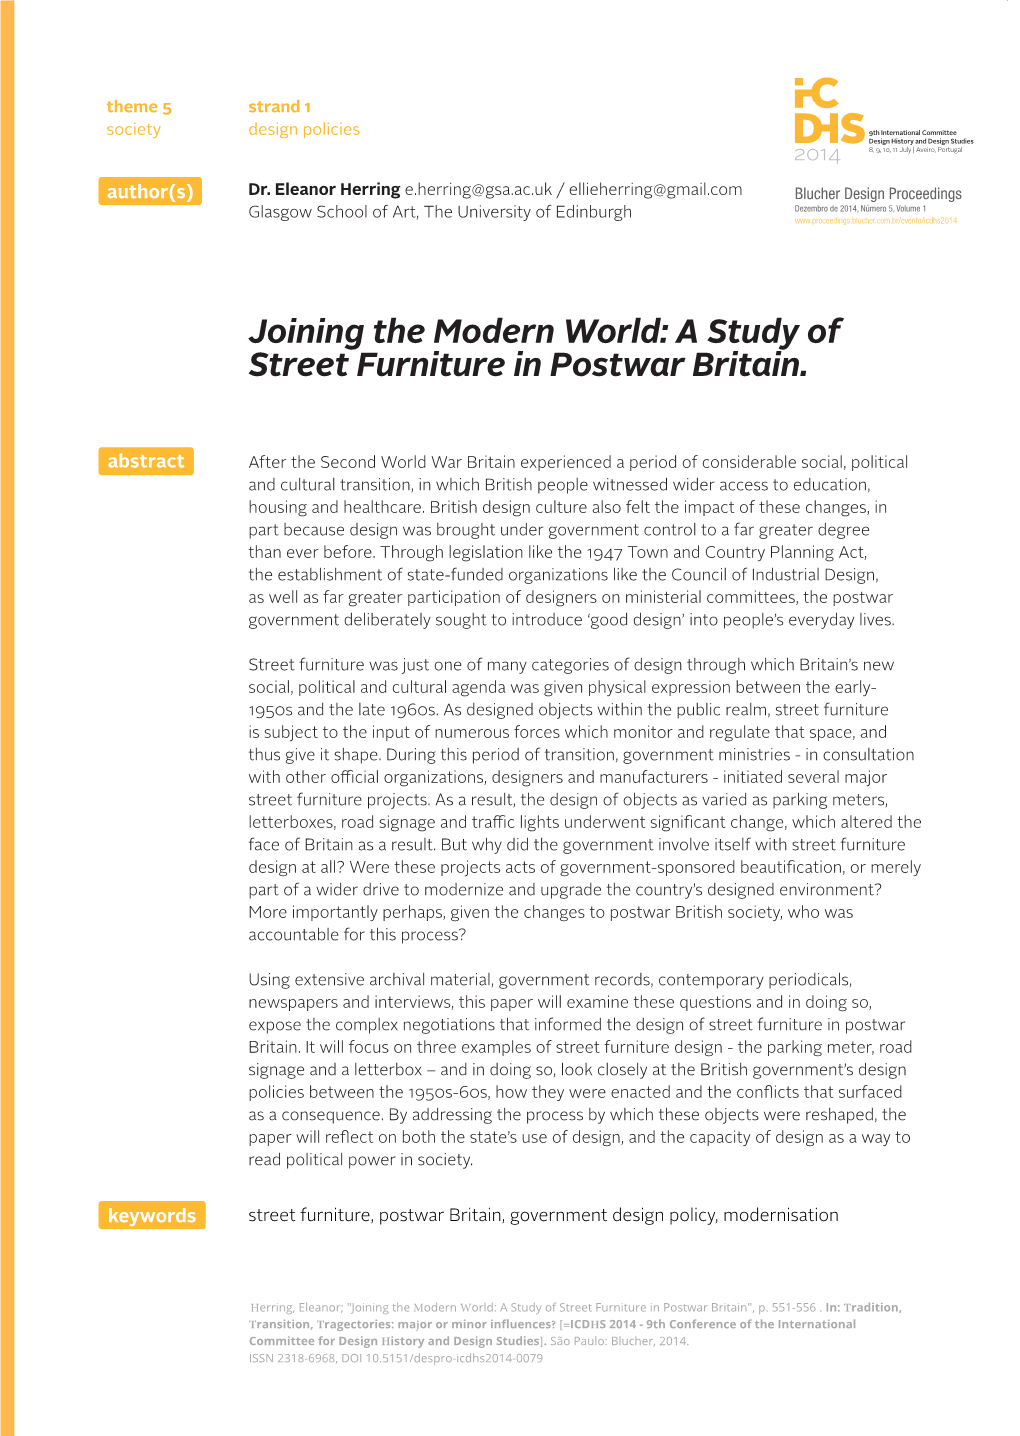 Joining the Modern World: a Study of Street Furniture in Postwar Britain